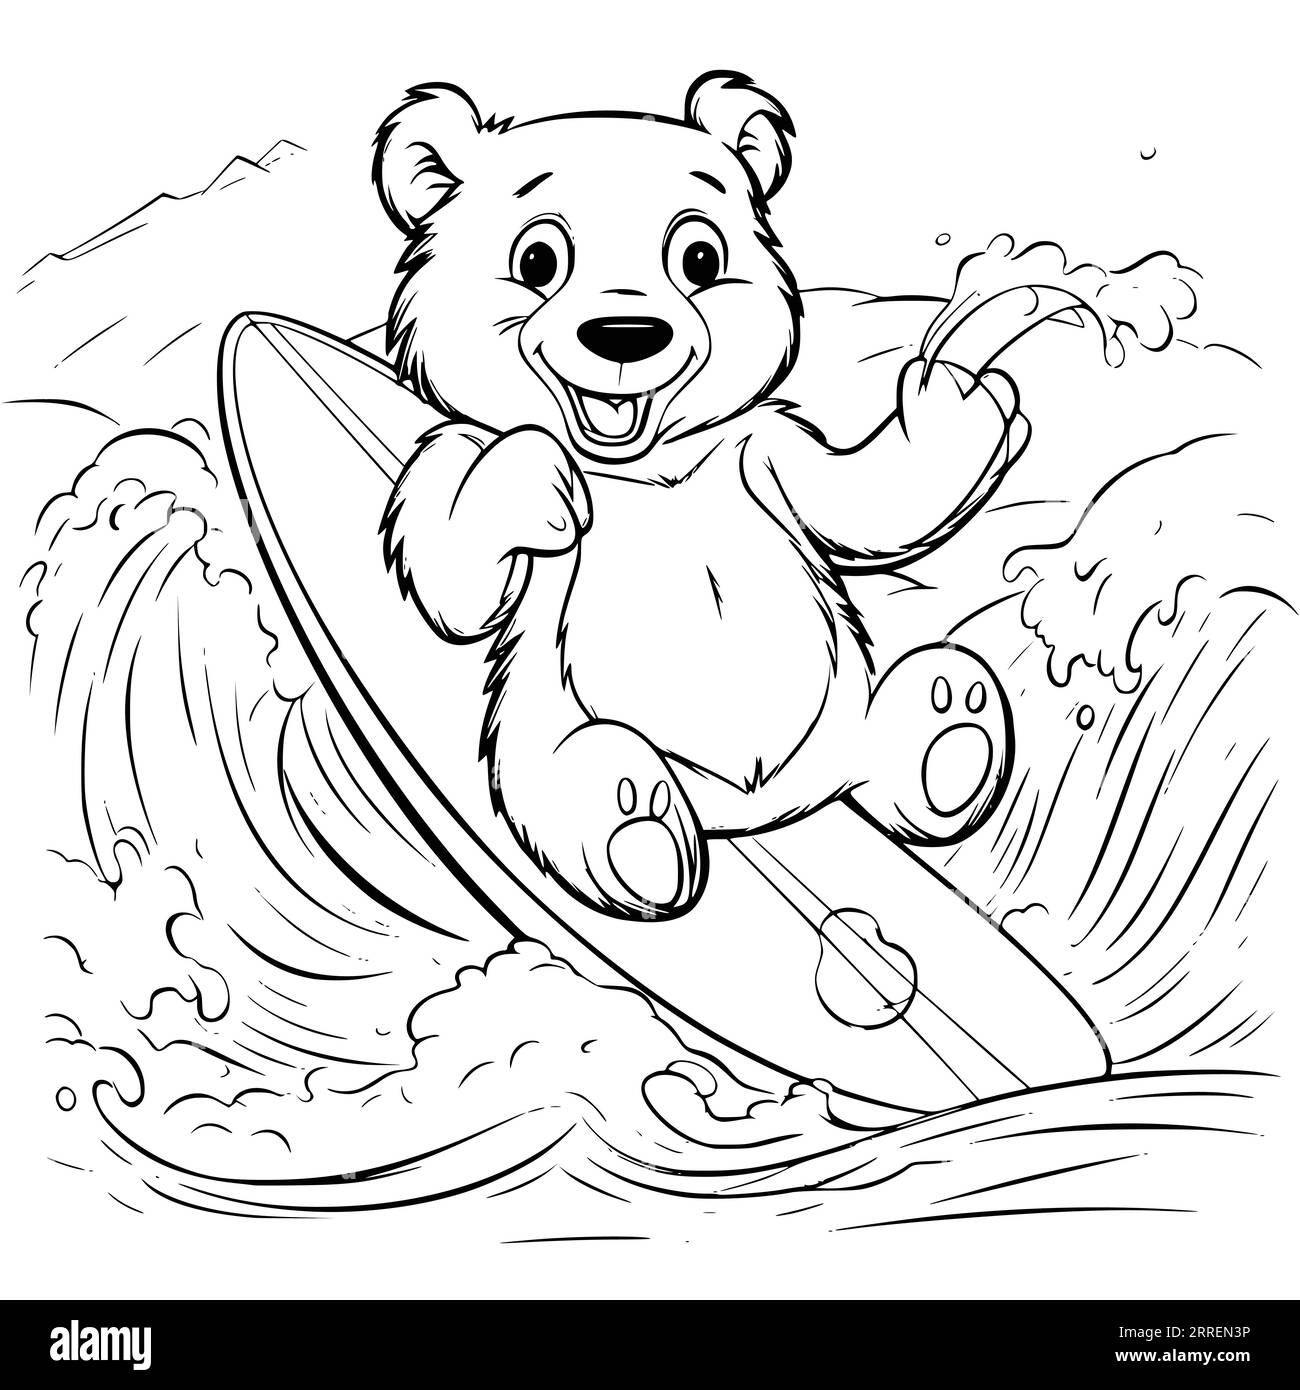 Bear Surfing Coloring Page Drawing For Kids Stock Vector